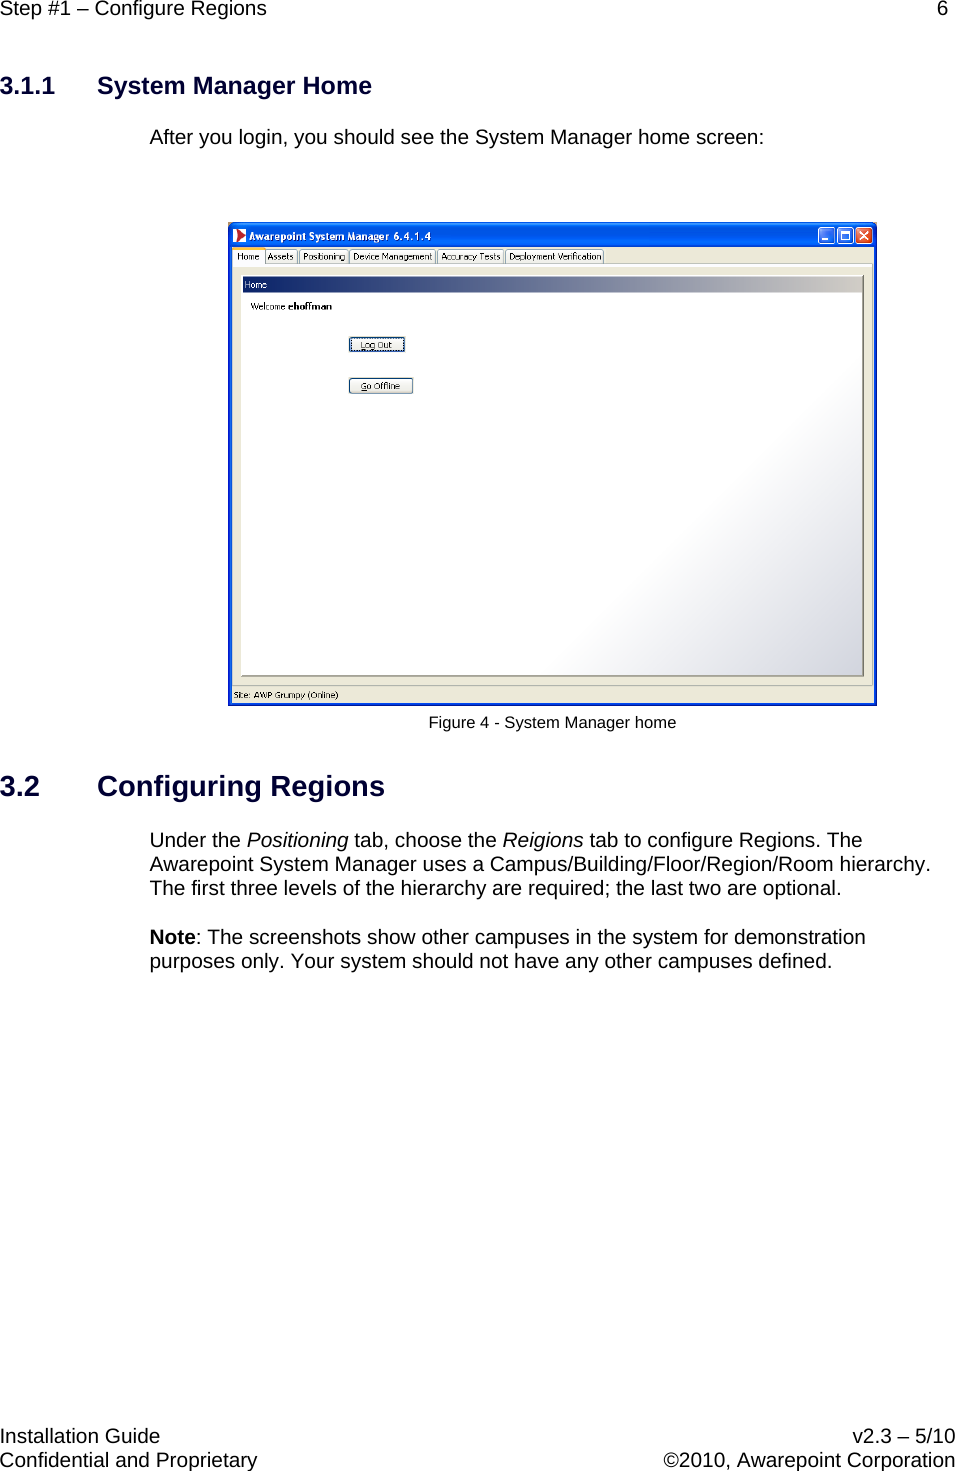 Step #1 – Configure Regions    6   Installation Guide    v2.3 – 5/10 Confidential and Proprietary    ©2010, Awarepoint Corporation  3.1.1 System Manager Home After you login, you should see the System Manager home screen:   Figure 4 - System Manager home 3.2 Configuring Regions Under the Positioning tab, choose the Reigions tab to configure Regions. The Awarepoint System Manager uses a Campus/Building/Floor/Region/Room hierarchy. The first three levels of the hierarchy are required; the last two are optional.   Note: The screenshots show other campuses in the system for demonstration purposes only. Your system should not have any other campuses defined.  